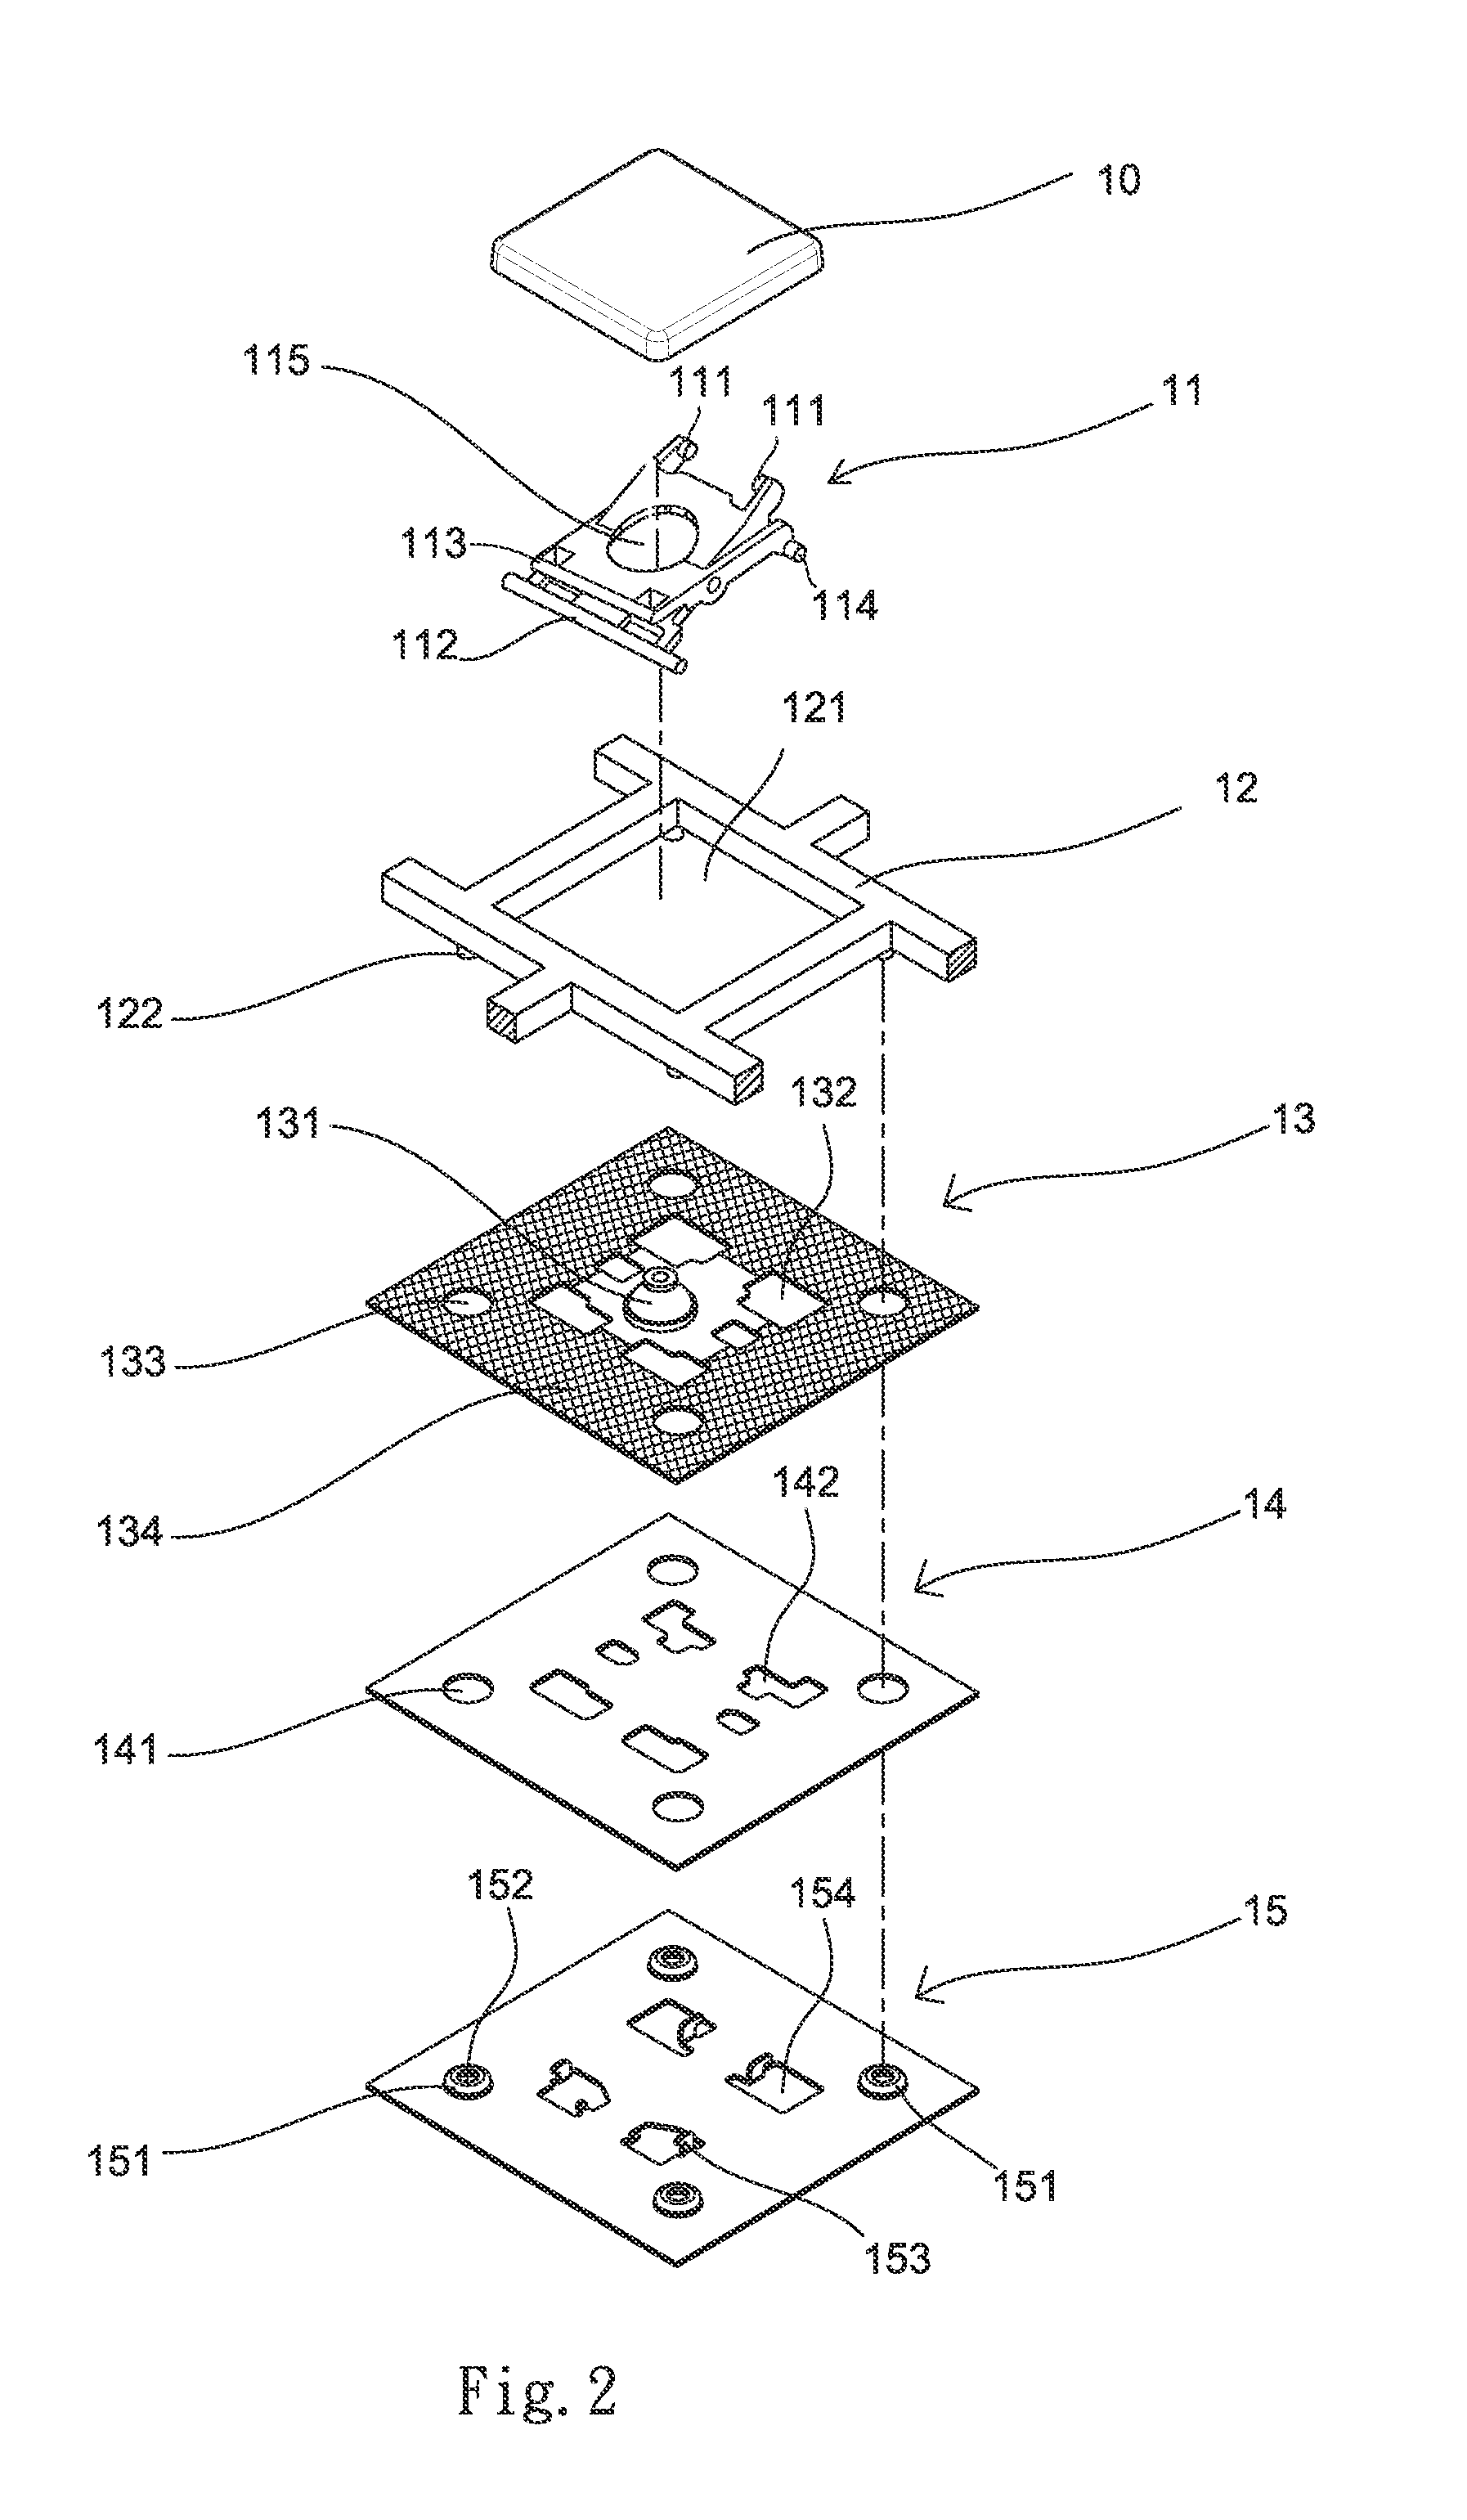 Back lighted membrane keyboard with parts being secured together by subjecting to ultrasonic welding